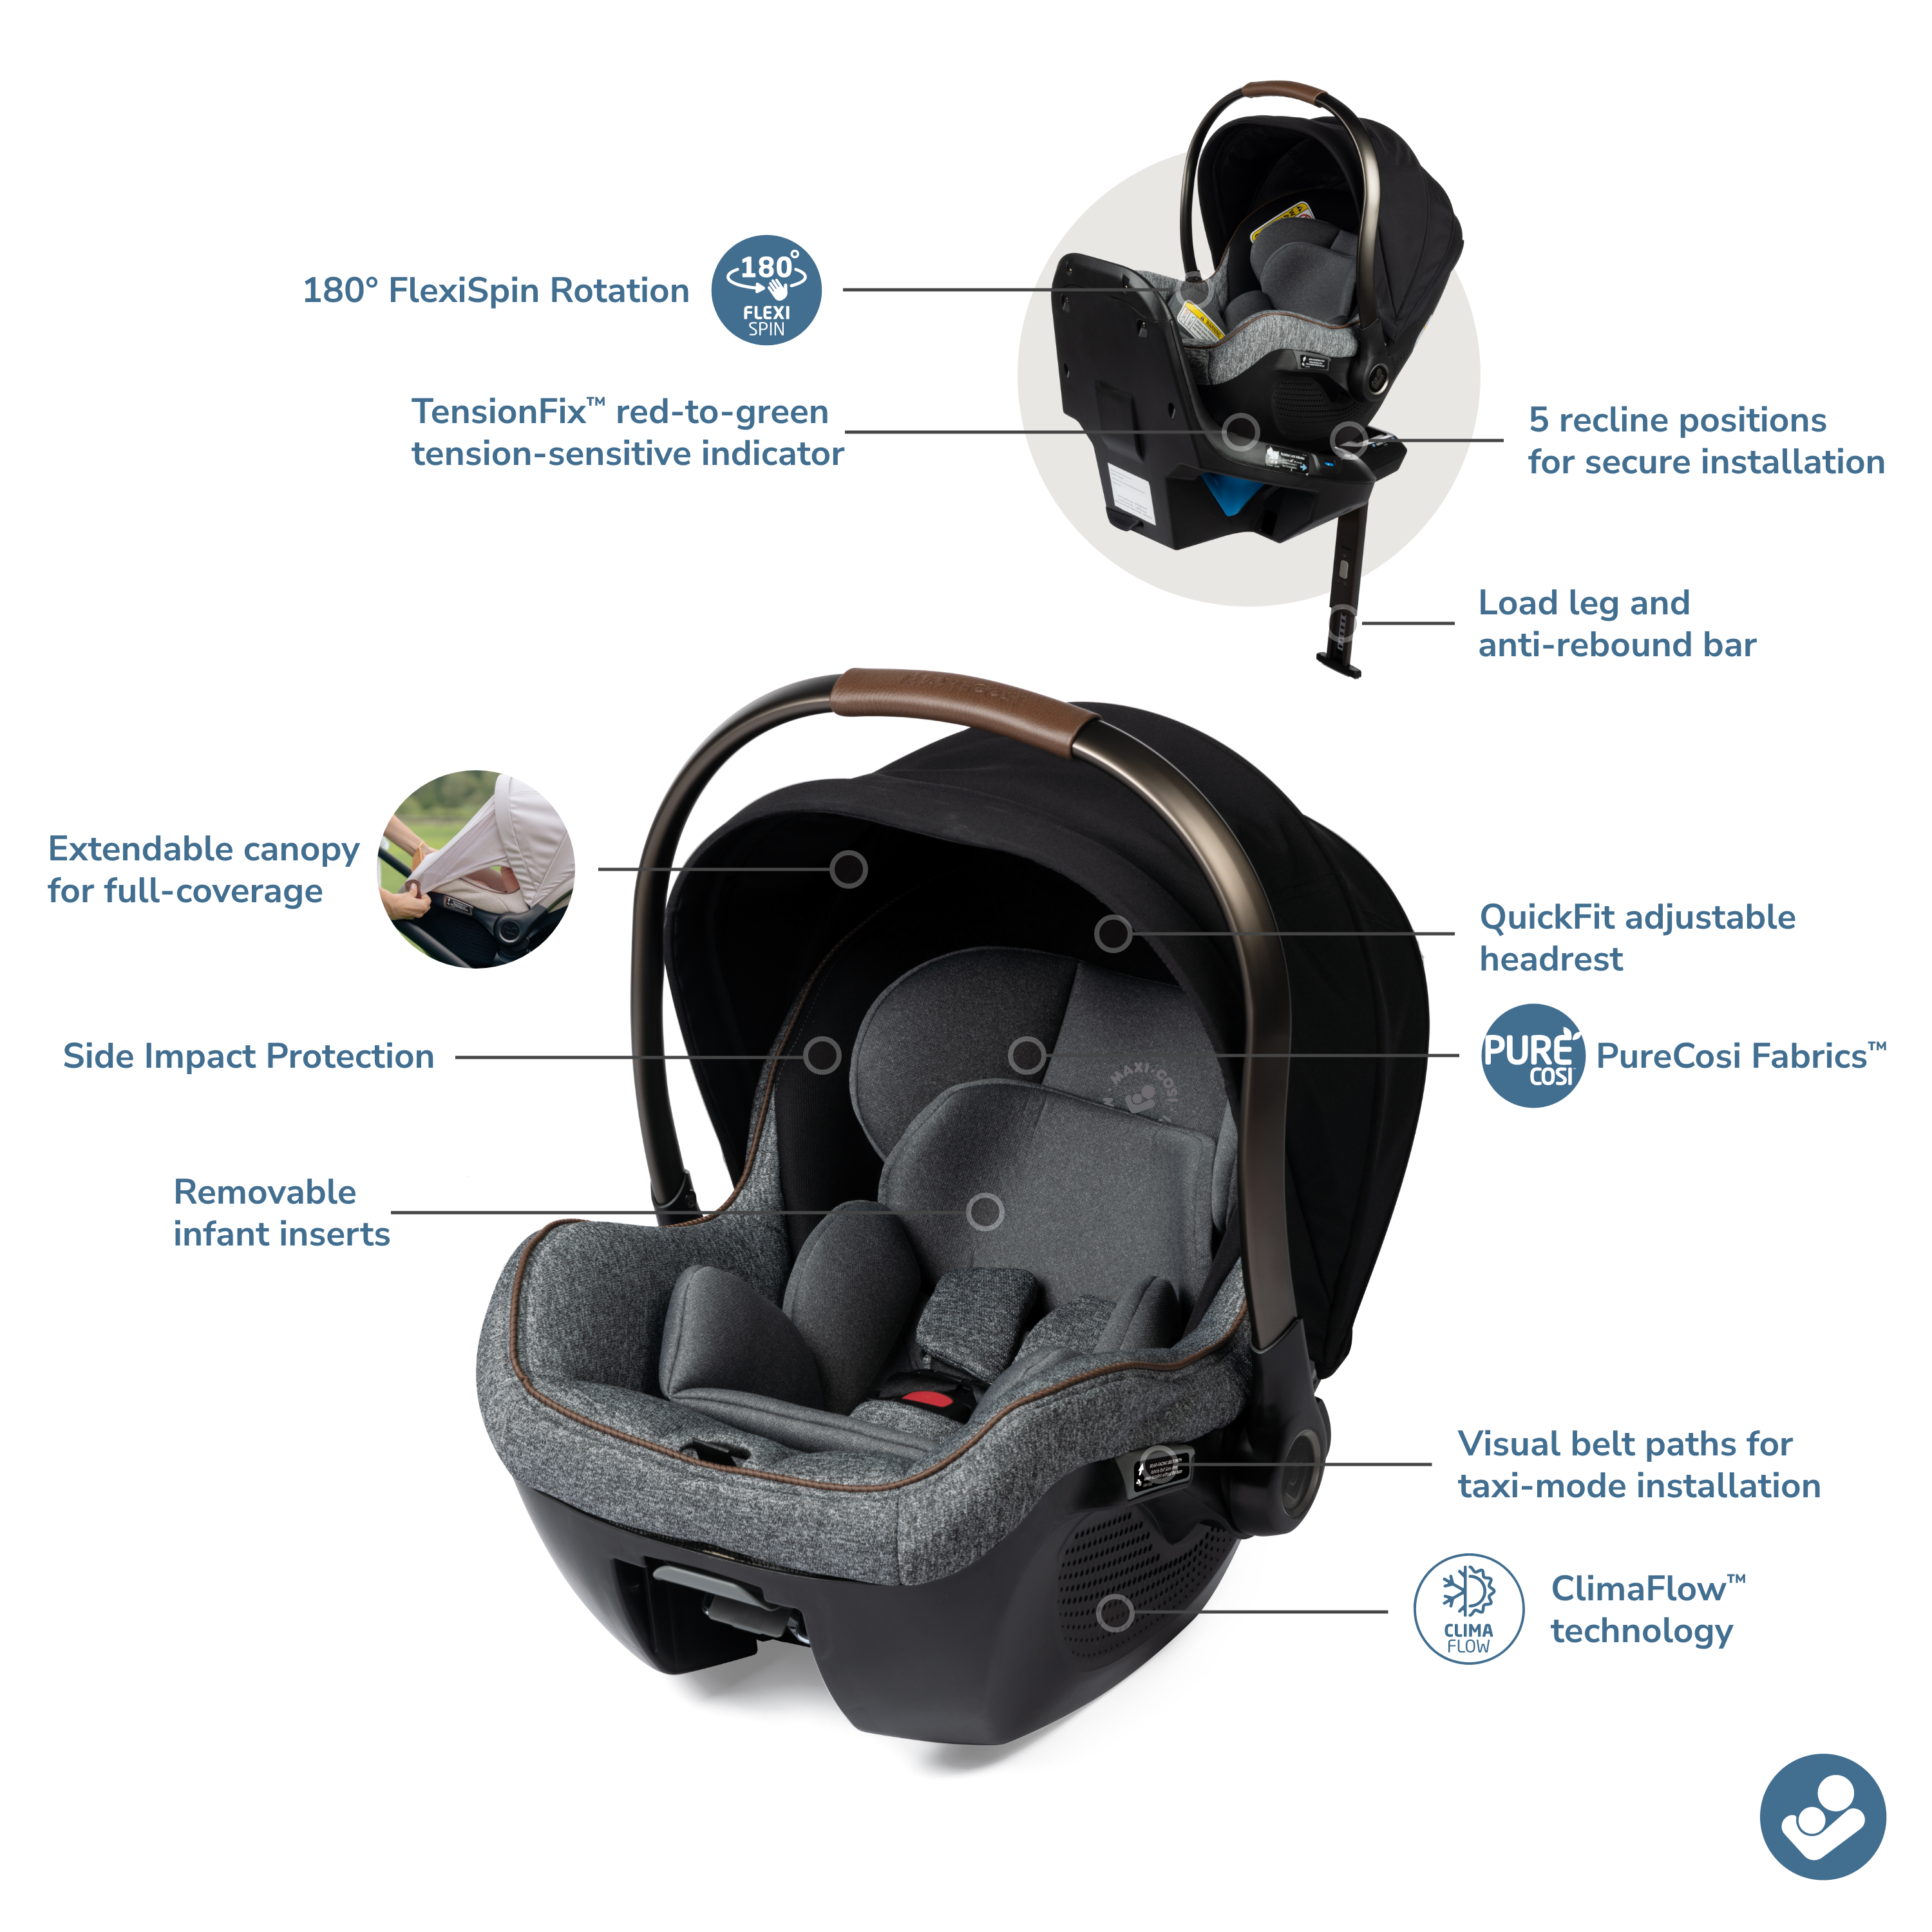 Peri™ 180° Rotating Infant Car Seat - Onyx Wonder - hotspot image showing all features